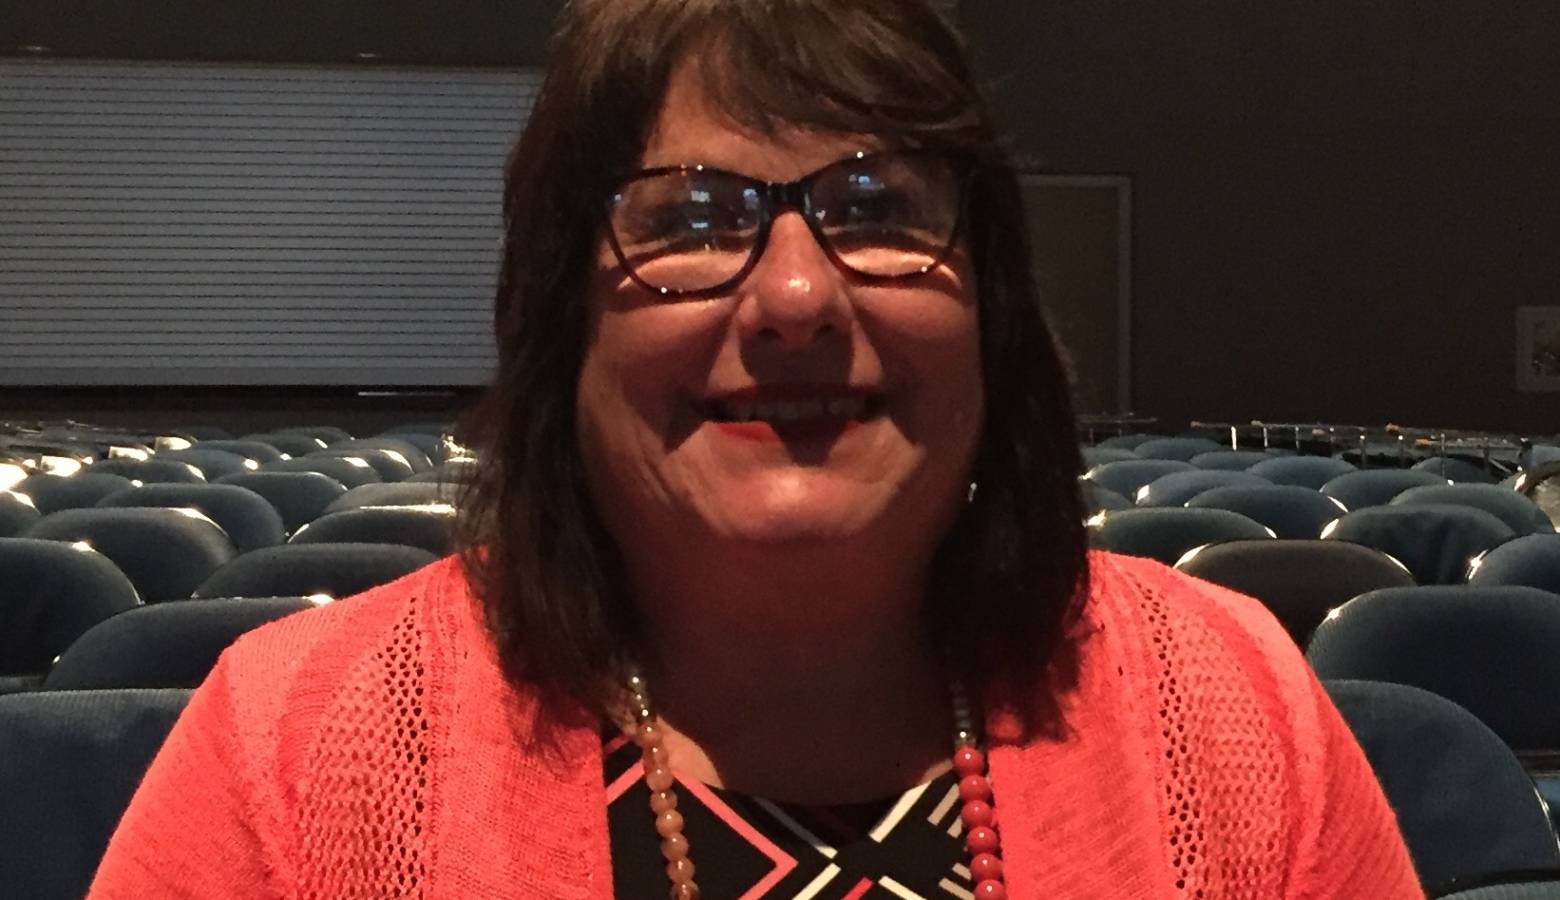 American Association of Nurse Practitioner President Joyce Knestrick attended an annual conference in Indianapolis. (Jill Sheridan IPB News)